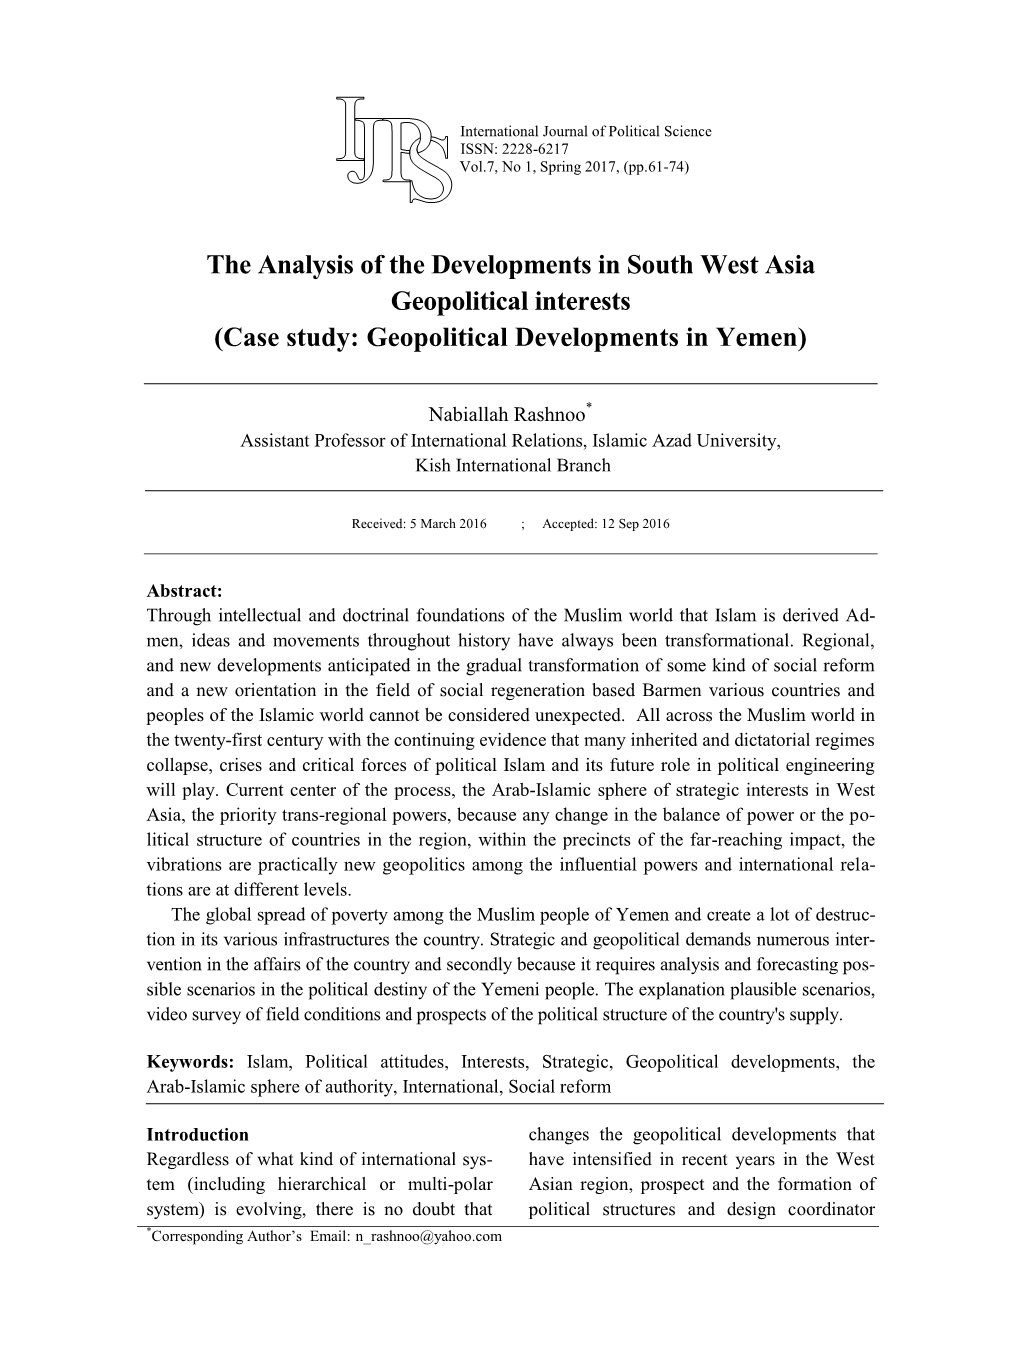 The Analysis of the Developments in South West Asia Geopolitical Interests (Case Study: Geopolitical Developments in Yemen)